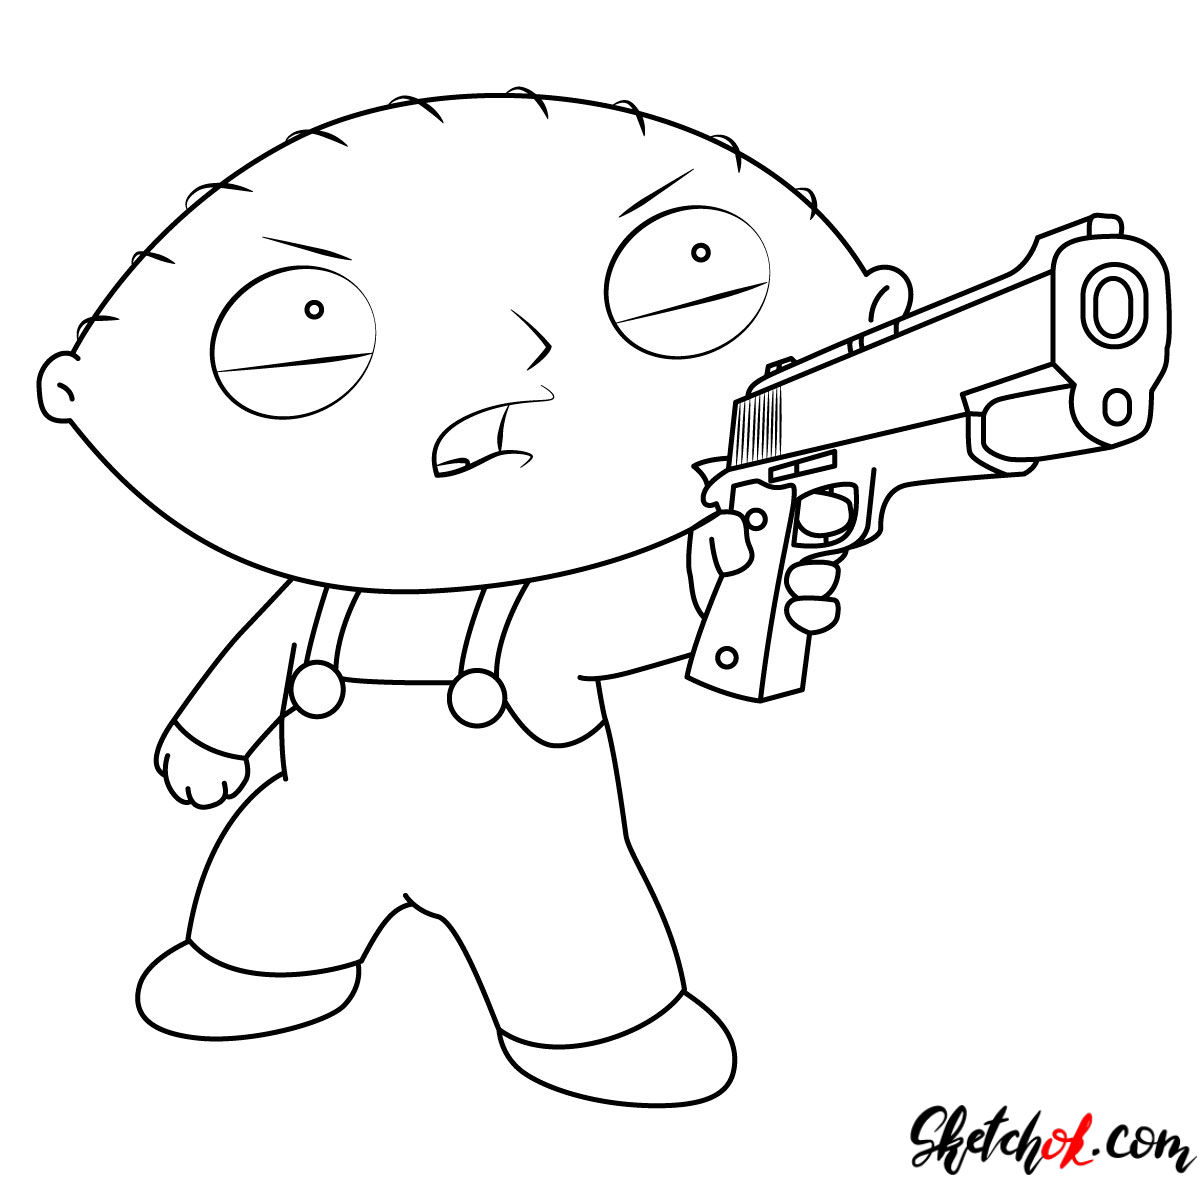 How to draw Stewie Griffin with a pistol - step 11